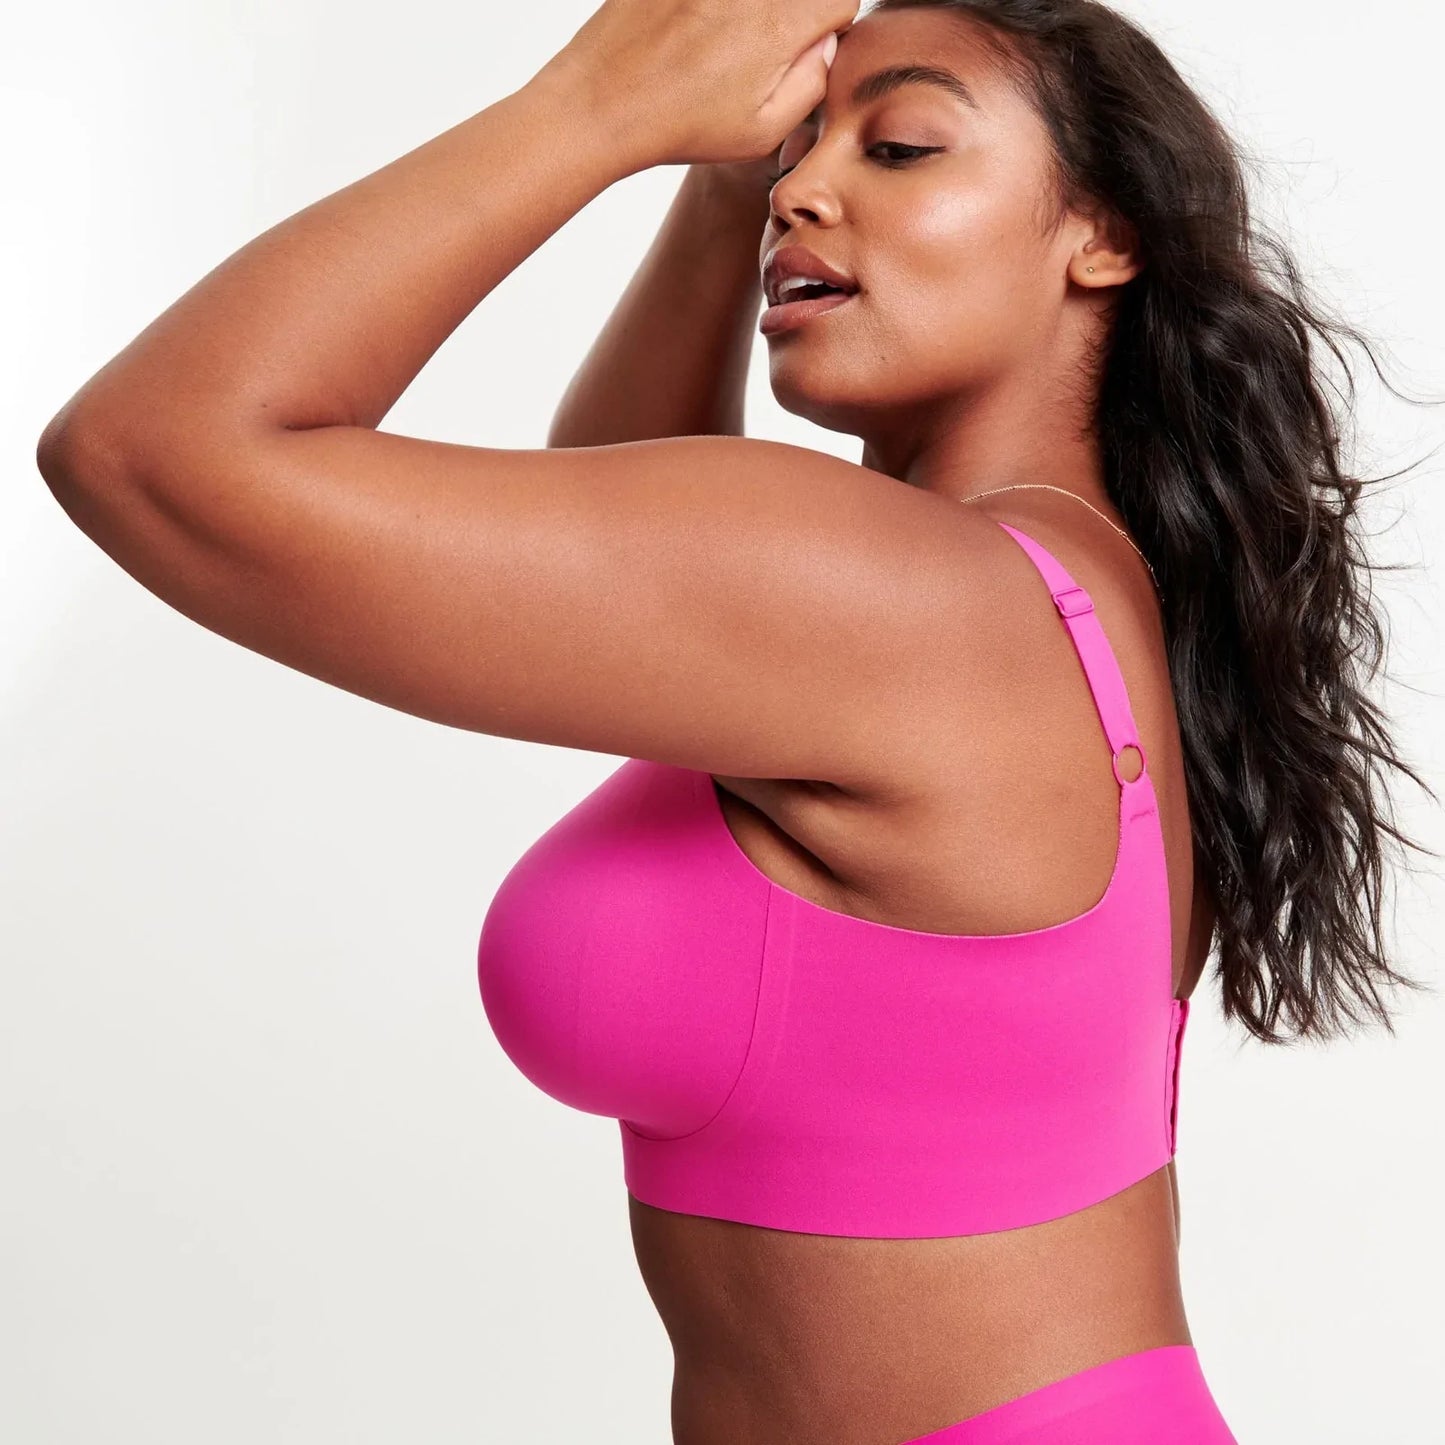 New 🌞 USA BRAND-NAME (Sport) PINK BRA 46F Authorized Reseller!